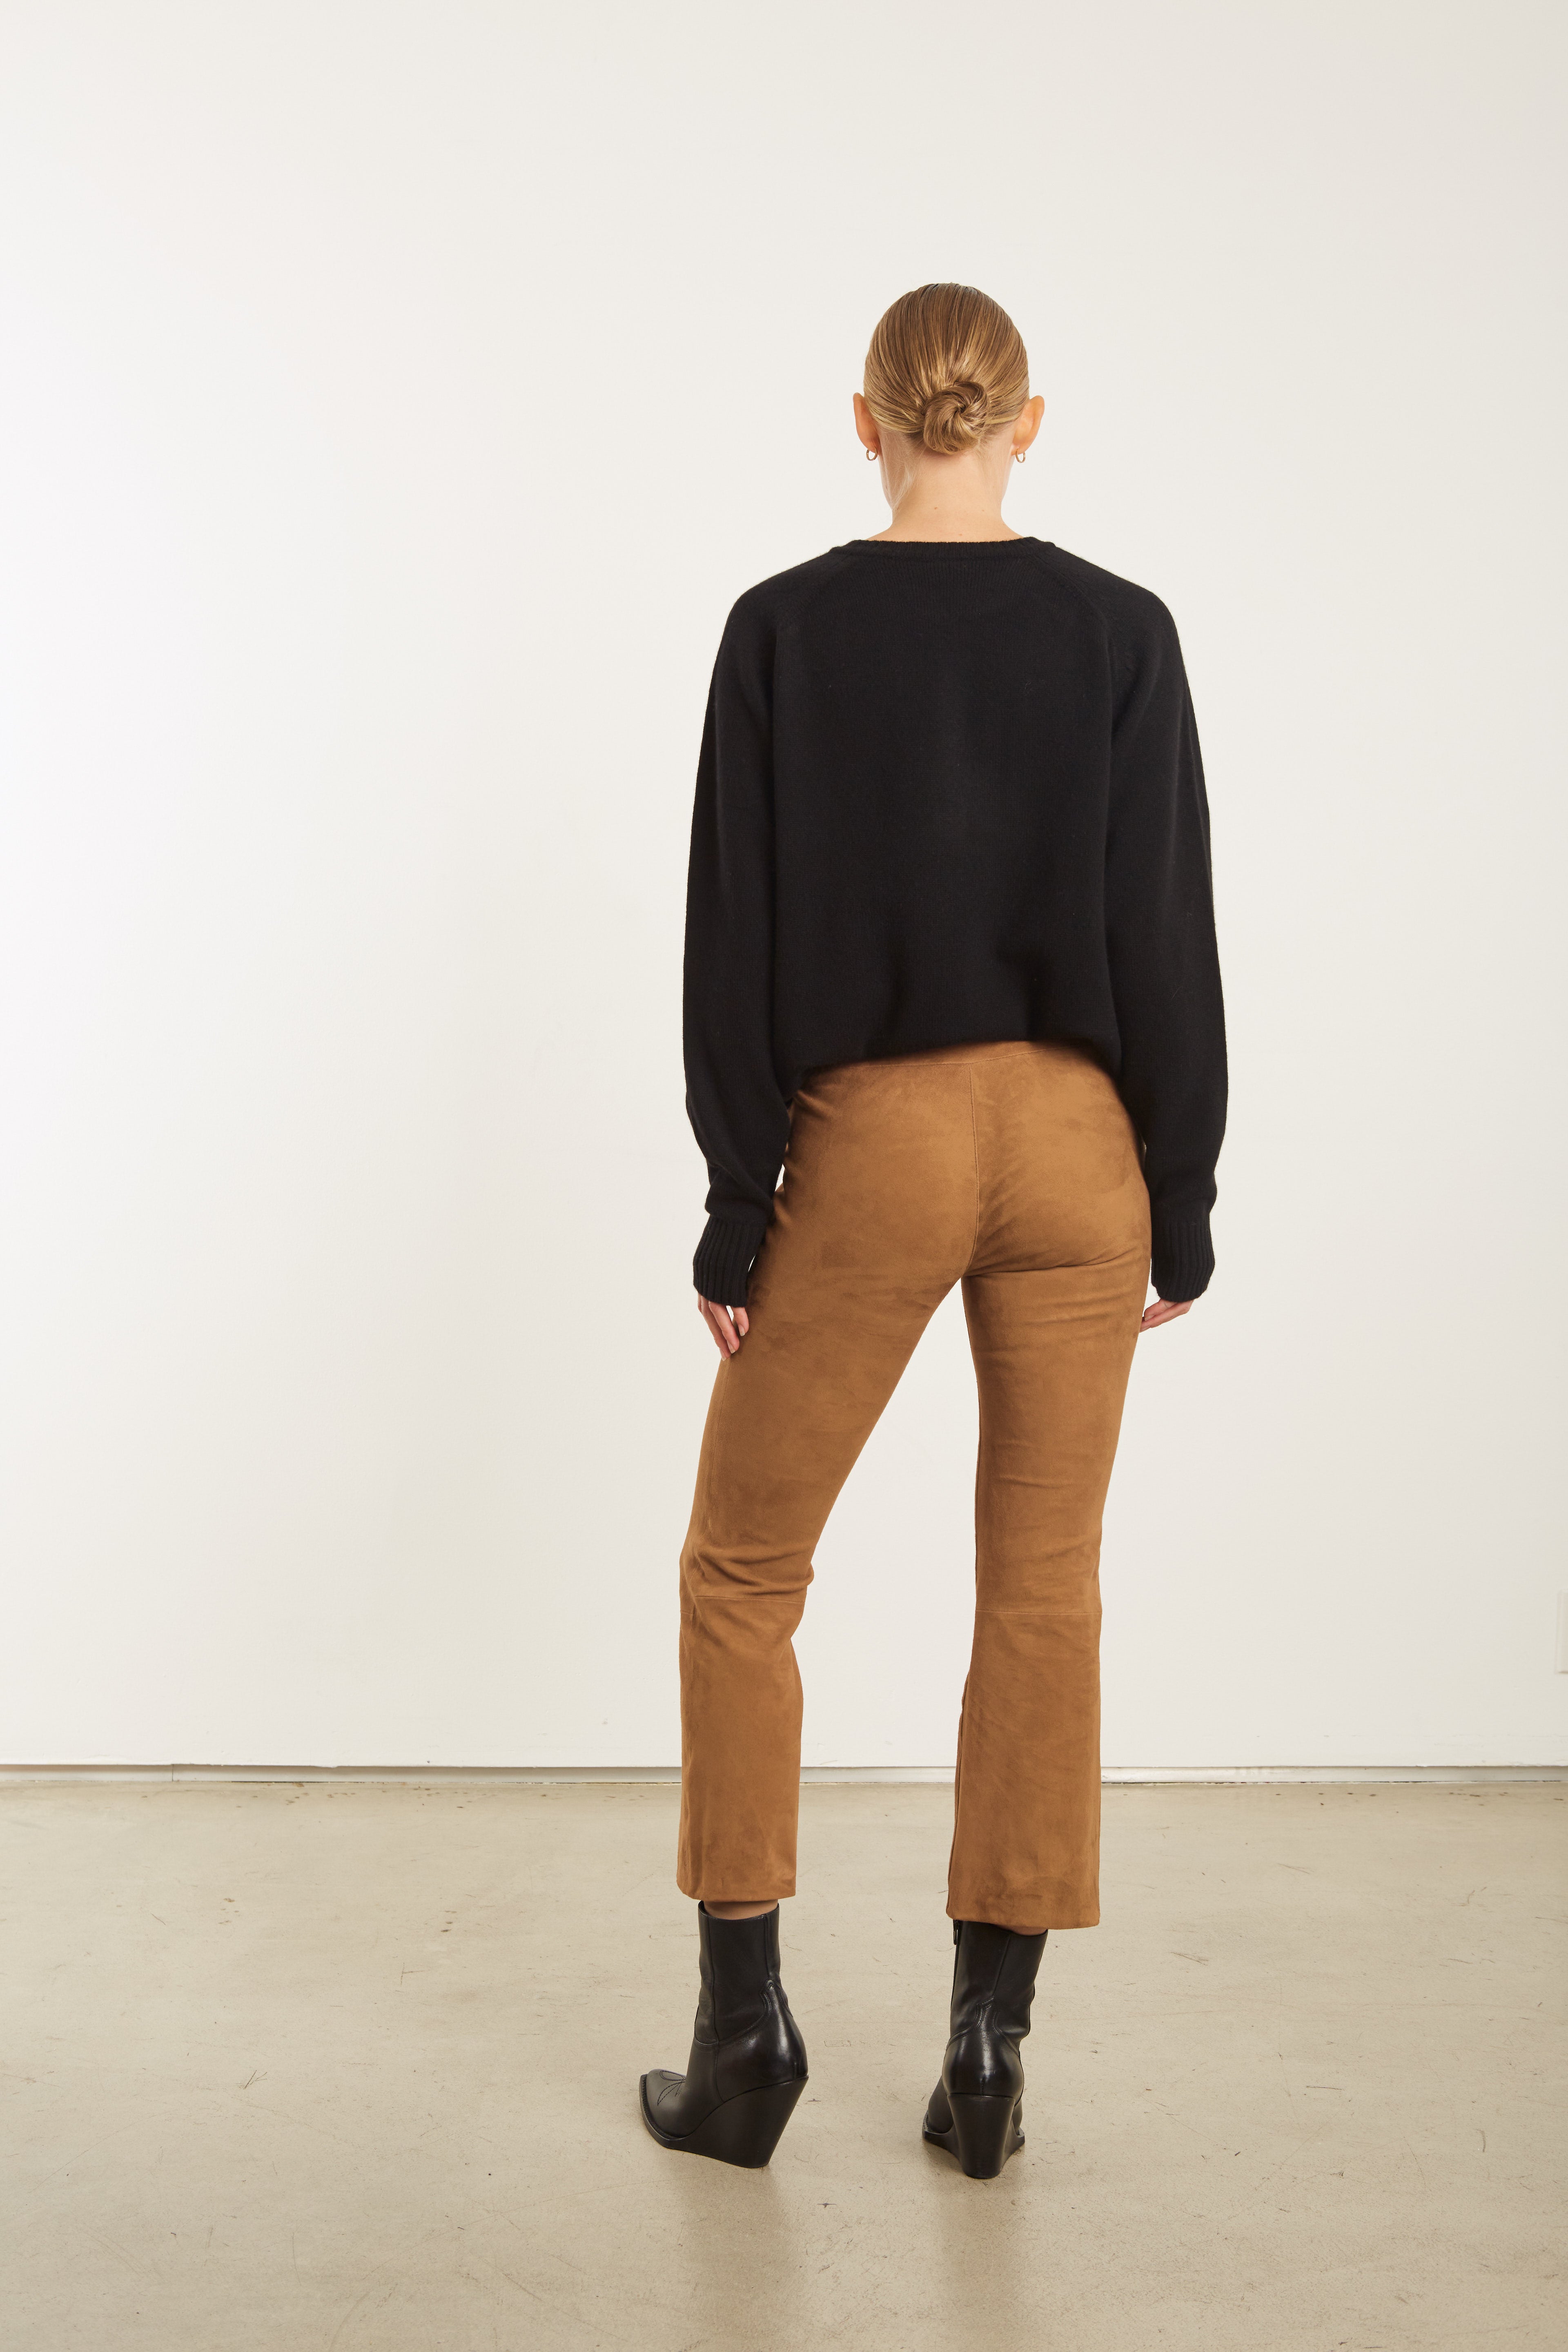 Cropped Flare Leather Leggings in Cognac